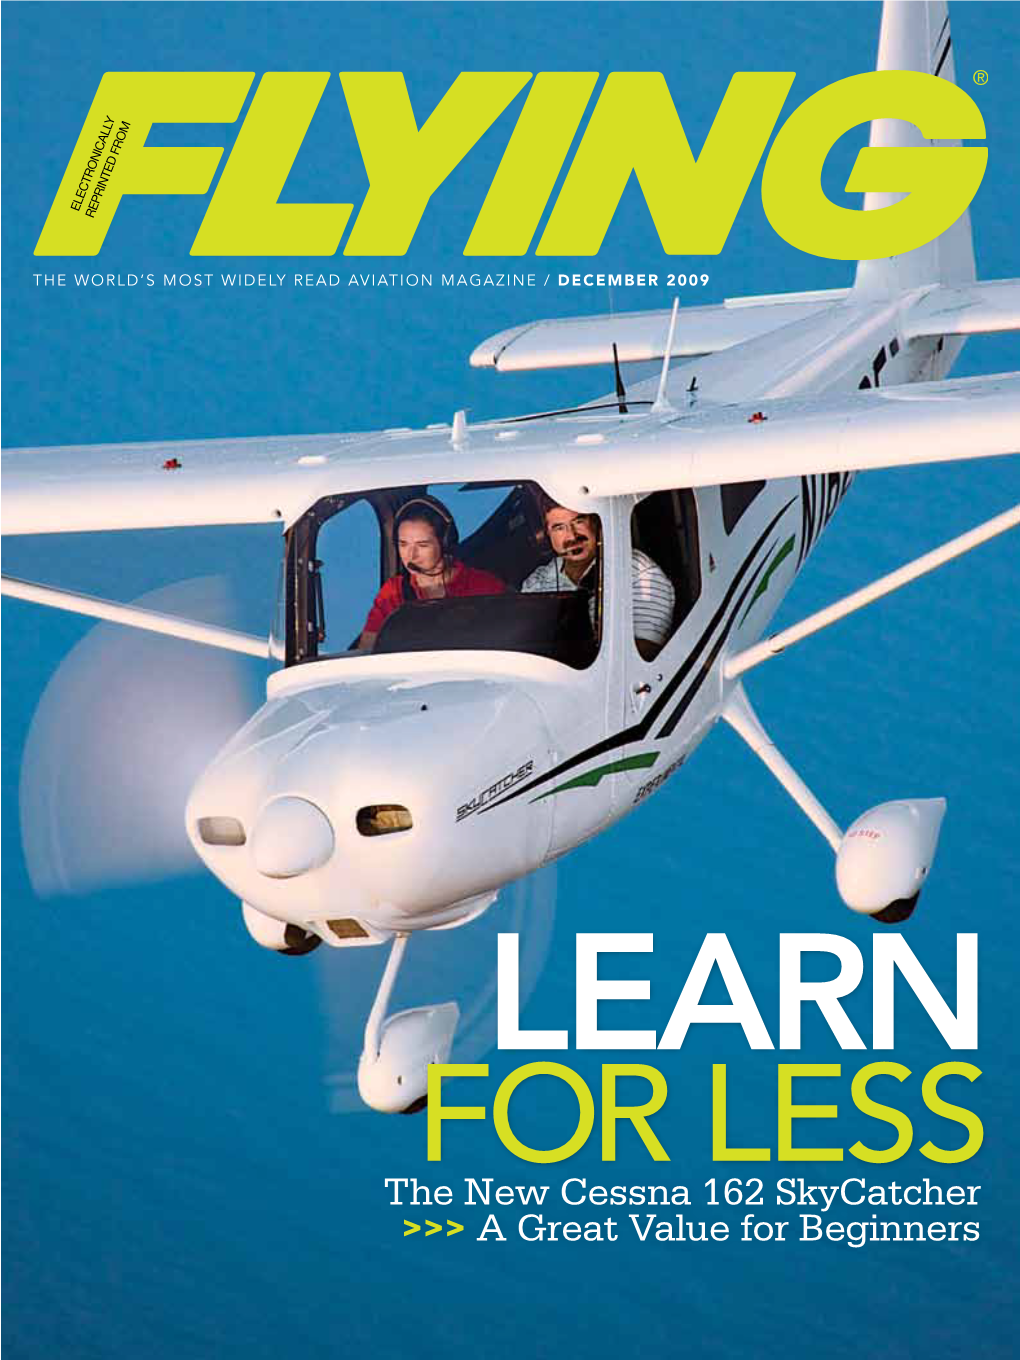 The New Cessna 162 Skycatcher &gt;&gt;&gt; a Great Value for Beginners